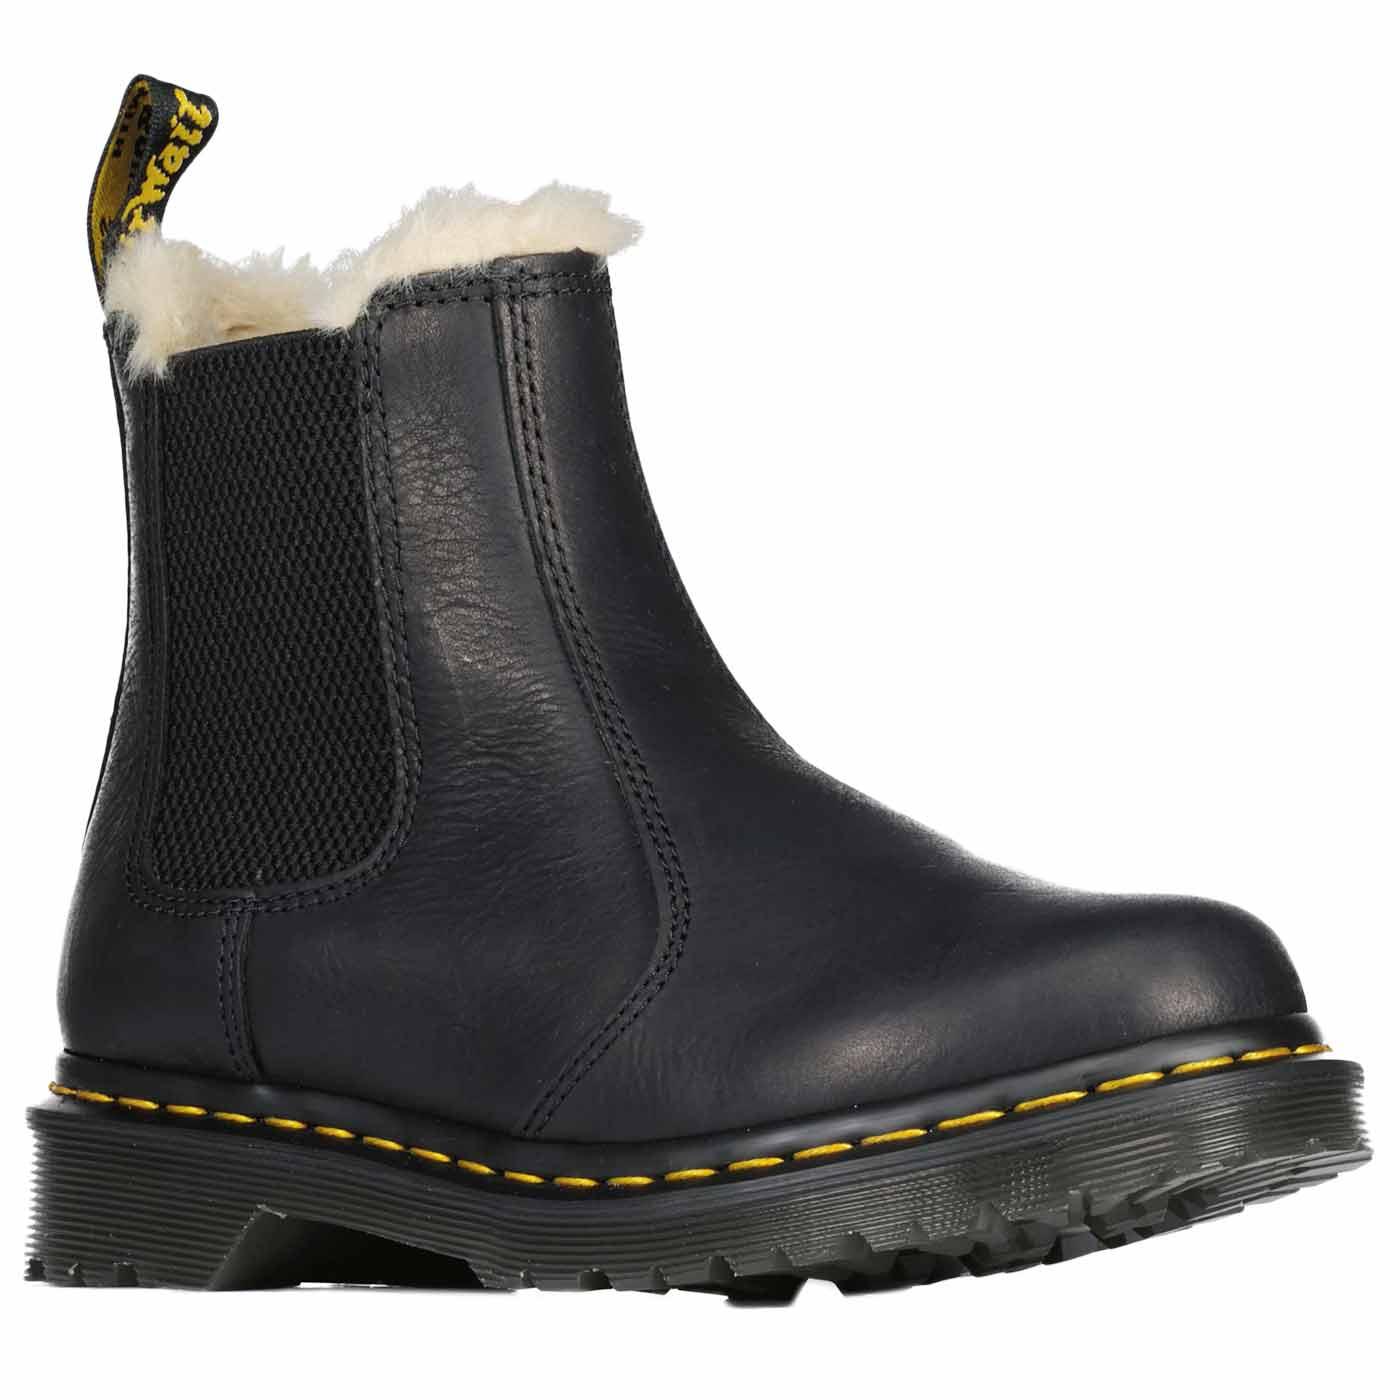 2976 Leonore DR MARTENS Sherpa Lined Chelsea Boots